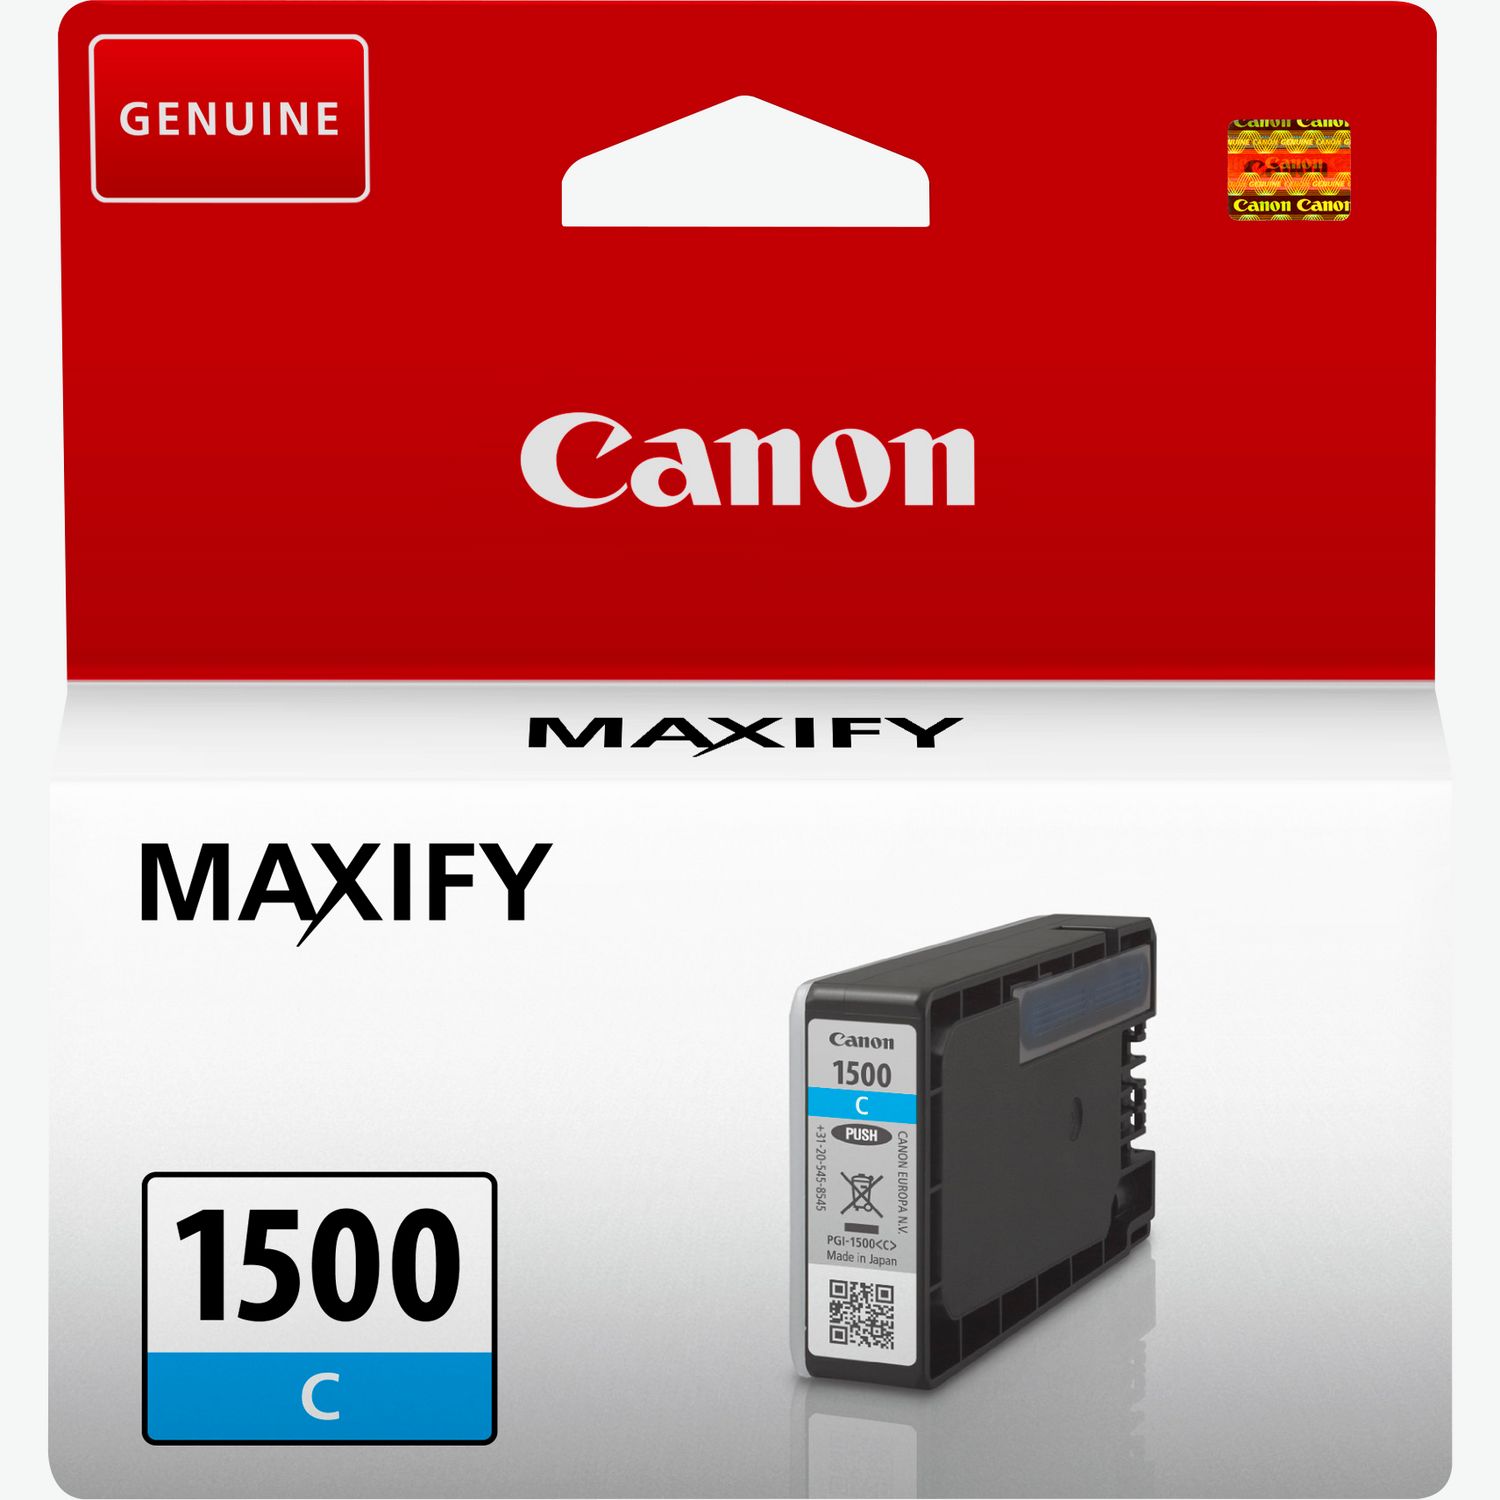 Cartouches d'encre pour imprimante Canon Maxify MB 5150 - Starink